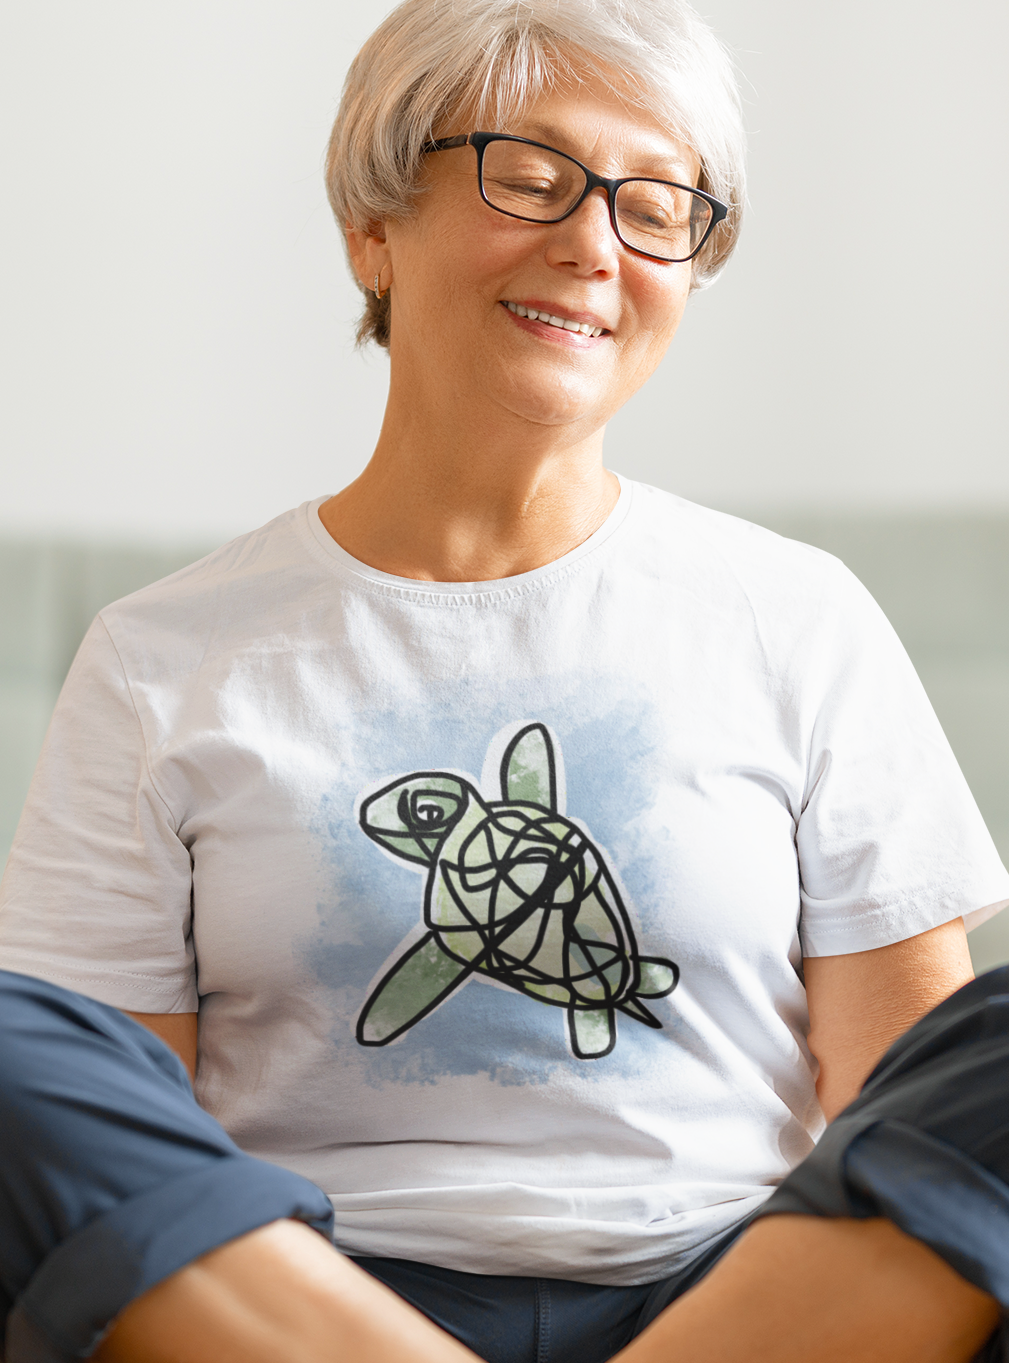 Sea Turtle T-shirt - Woman wearing an illustrated green sea turtle t-shirt by Hector and Bone